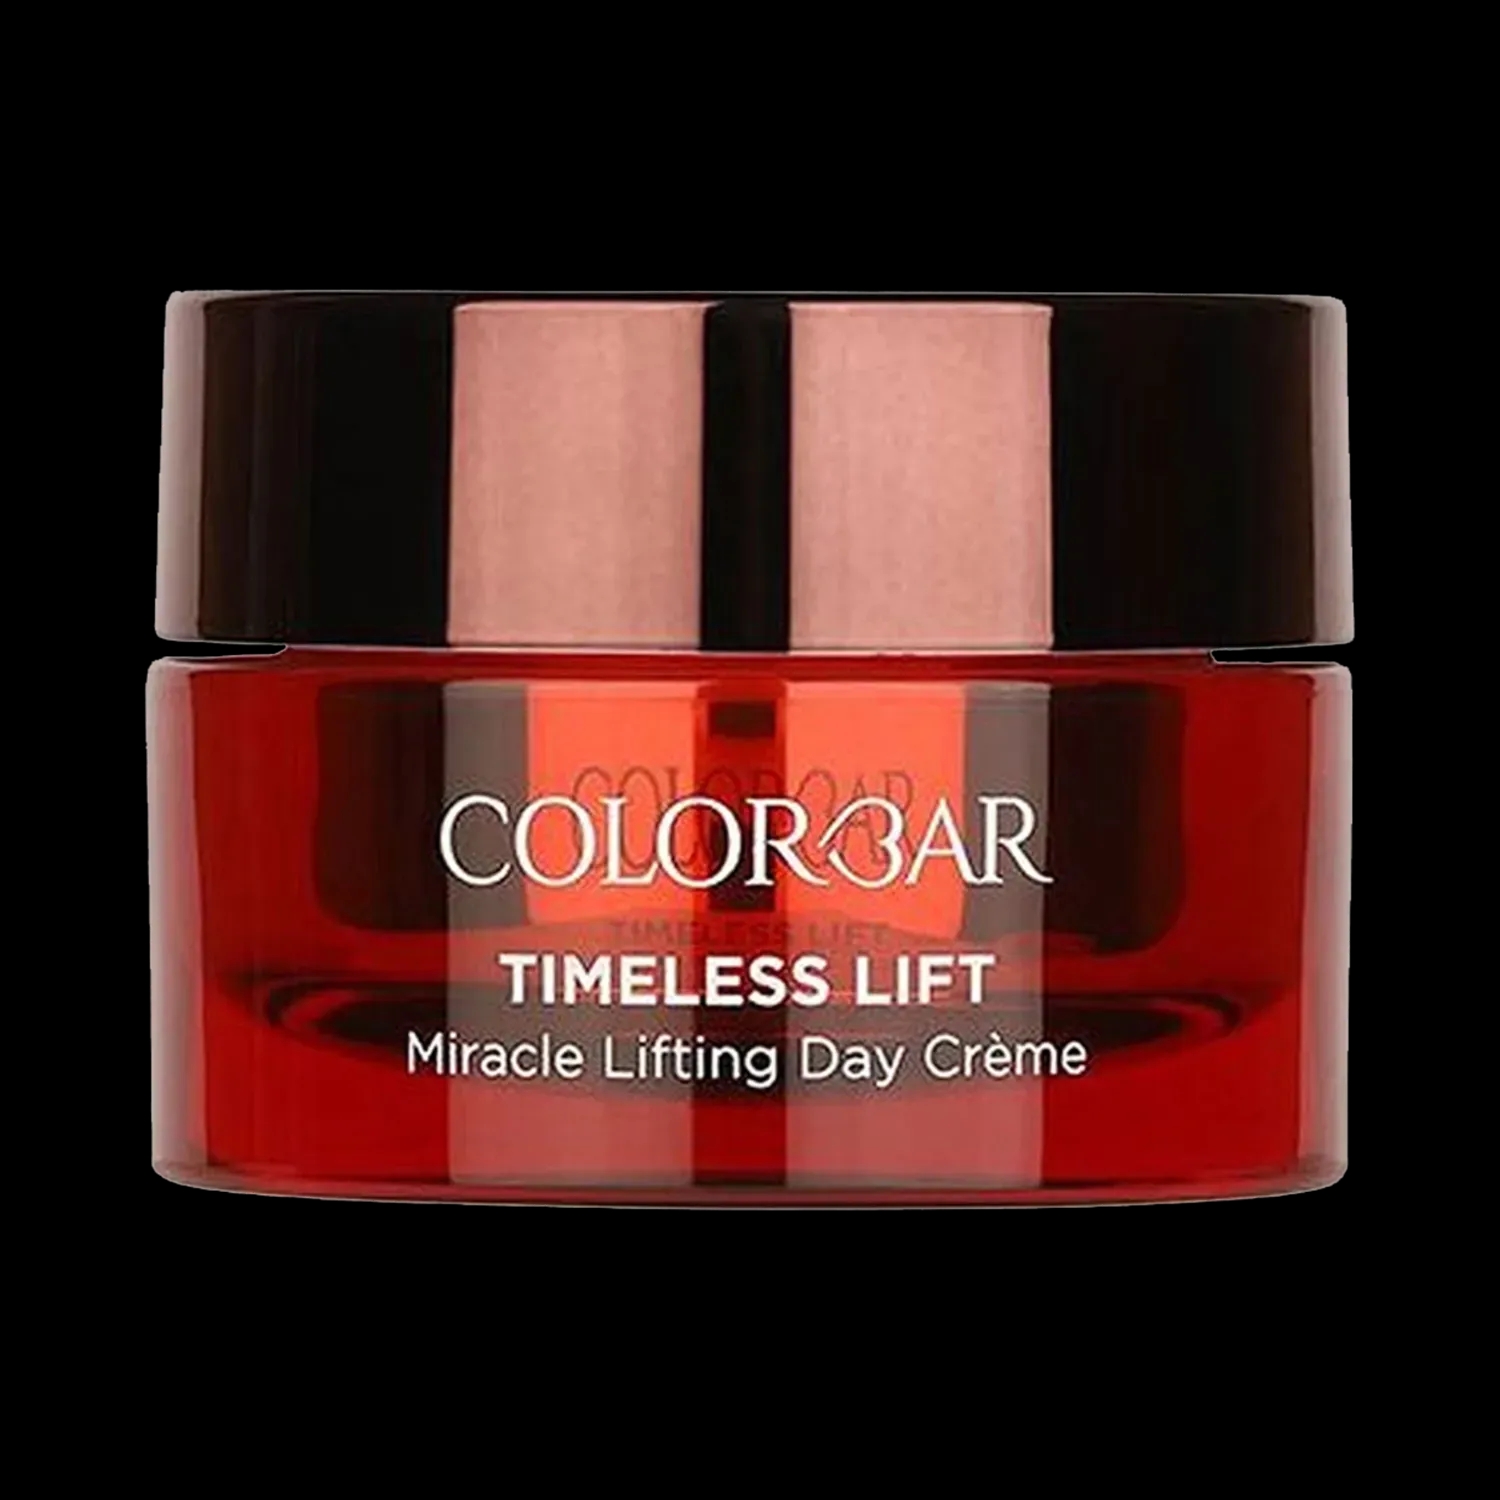 Colorbar | Colorbar Timeless Lift Miracle Lifting Day Creme (25g)